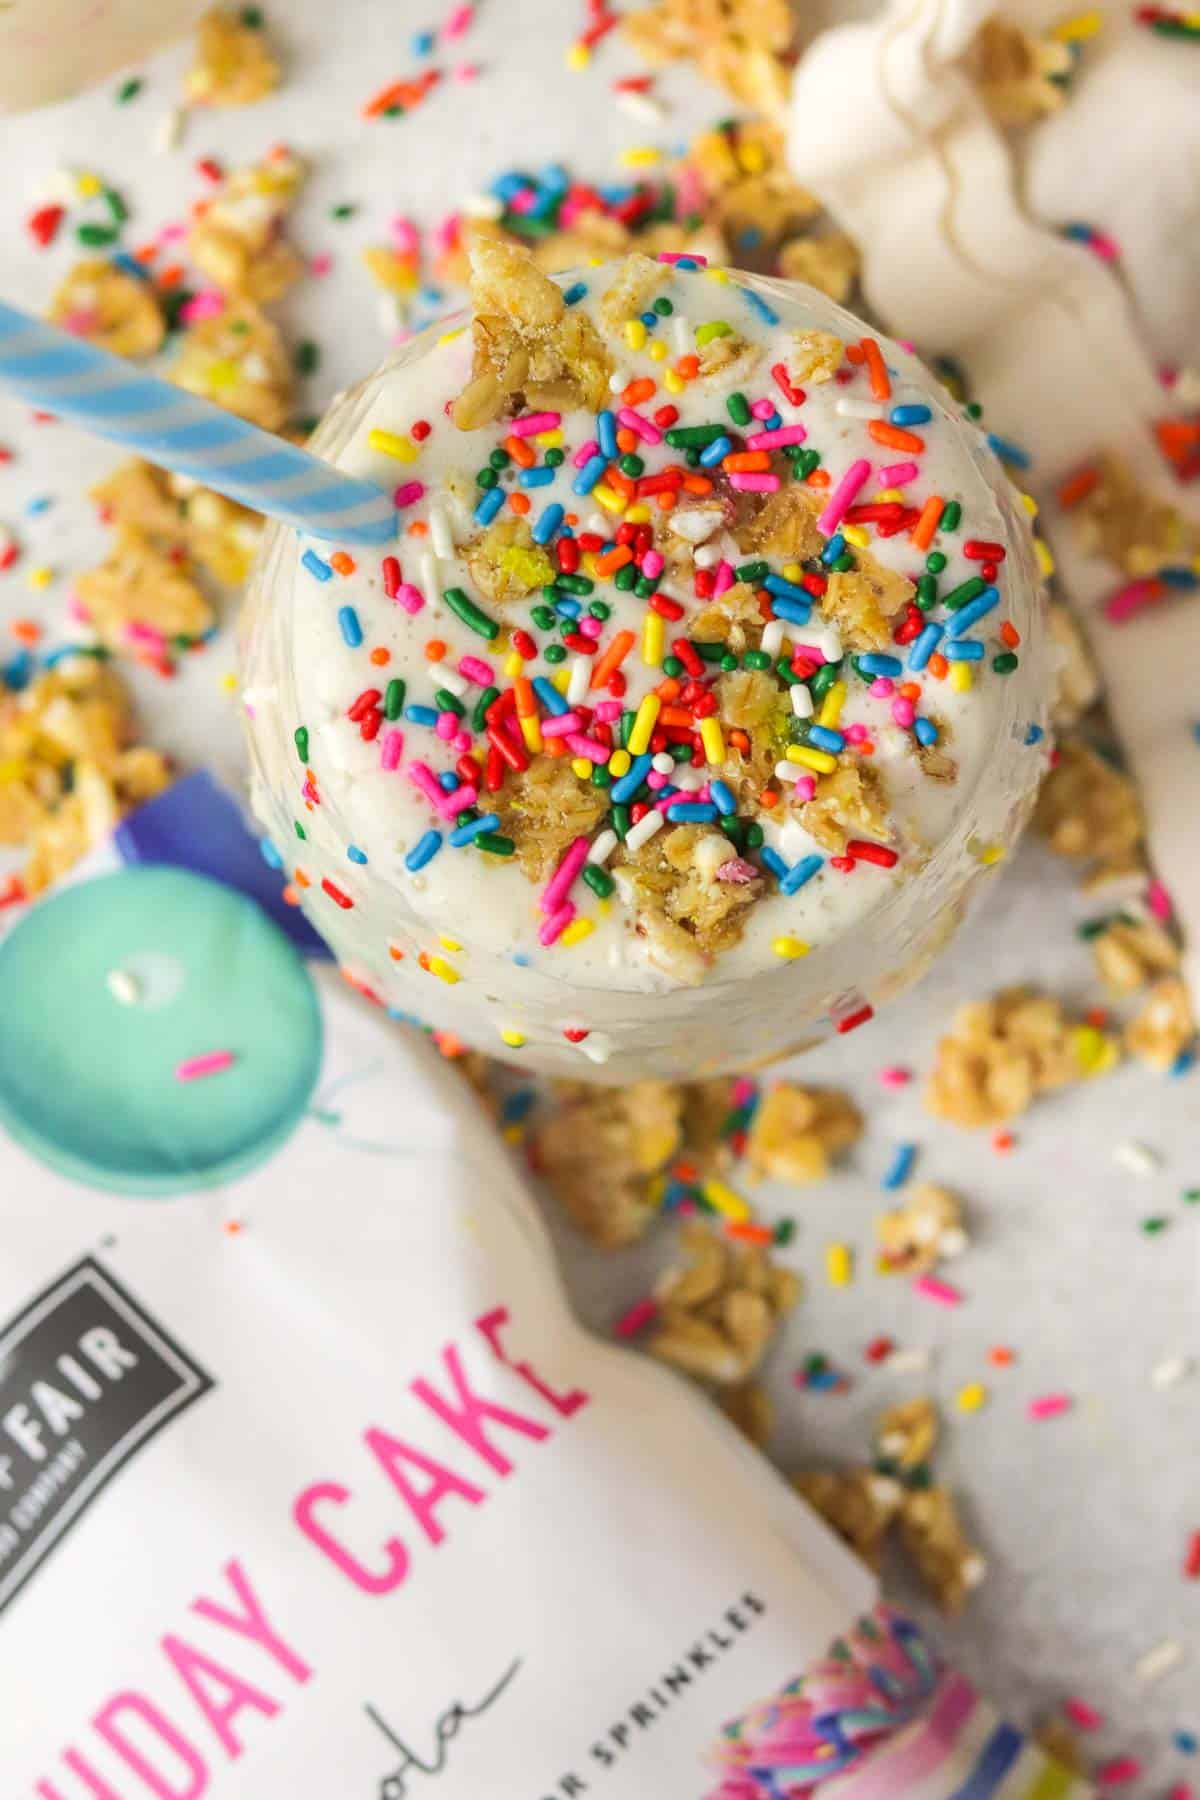 Top of a birthday cake protein shake with sprinkles and birthday cake granola.